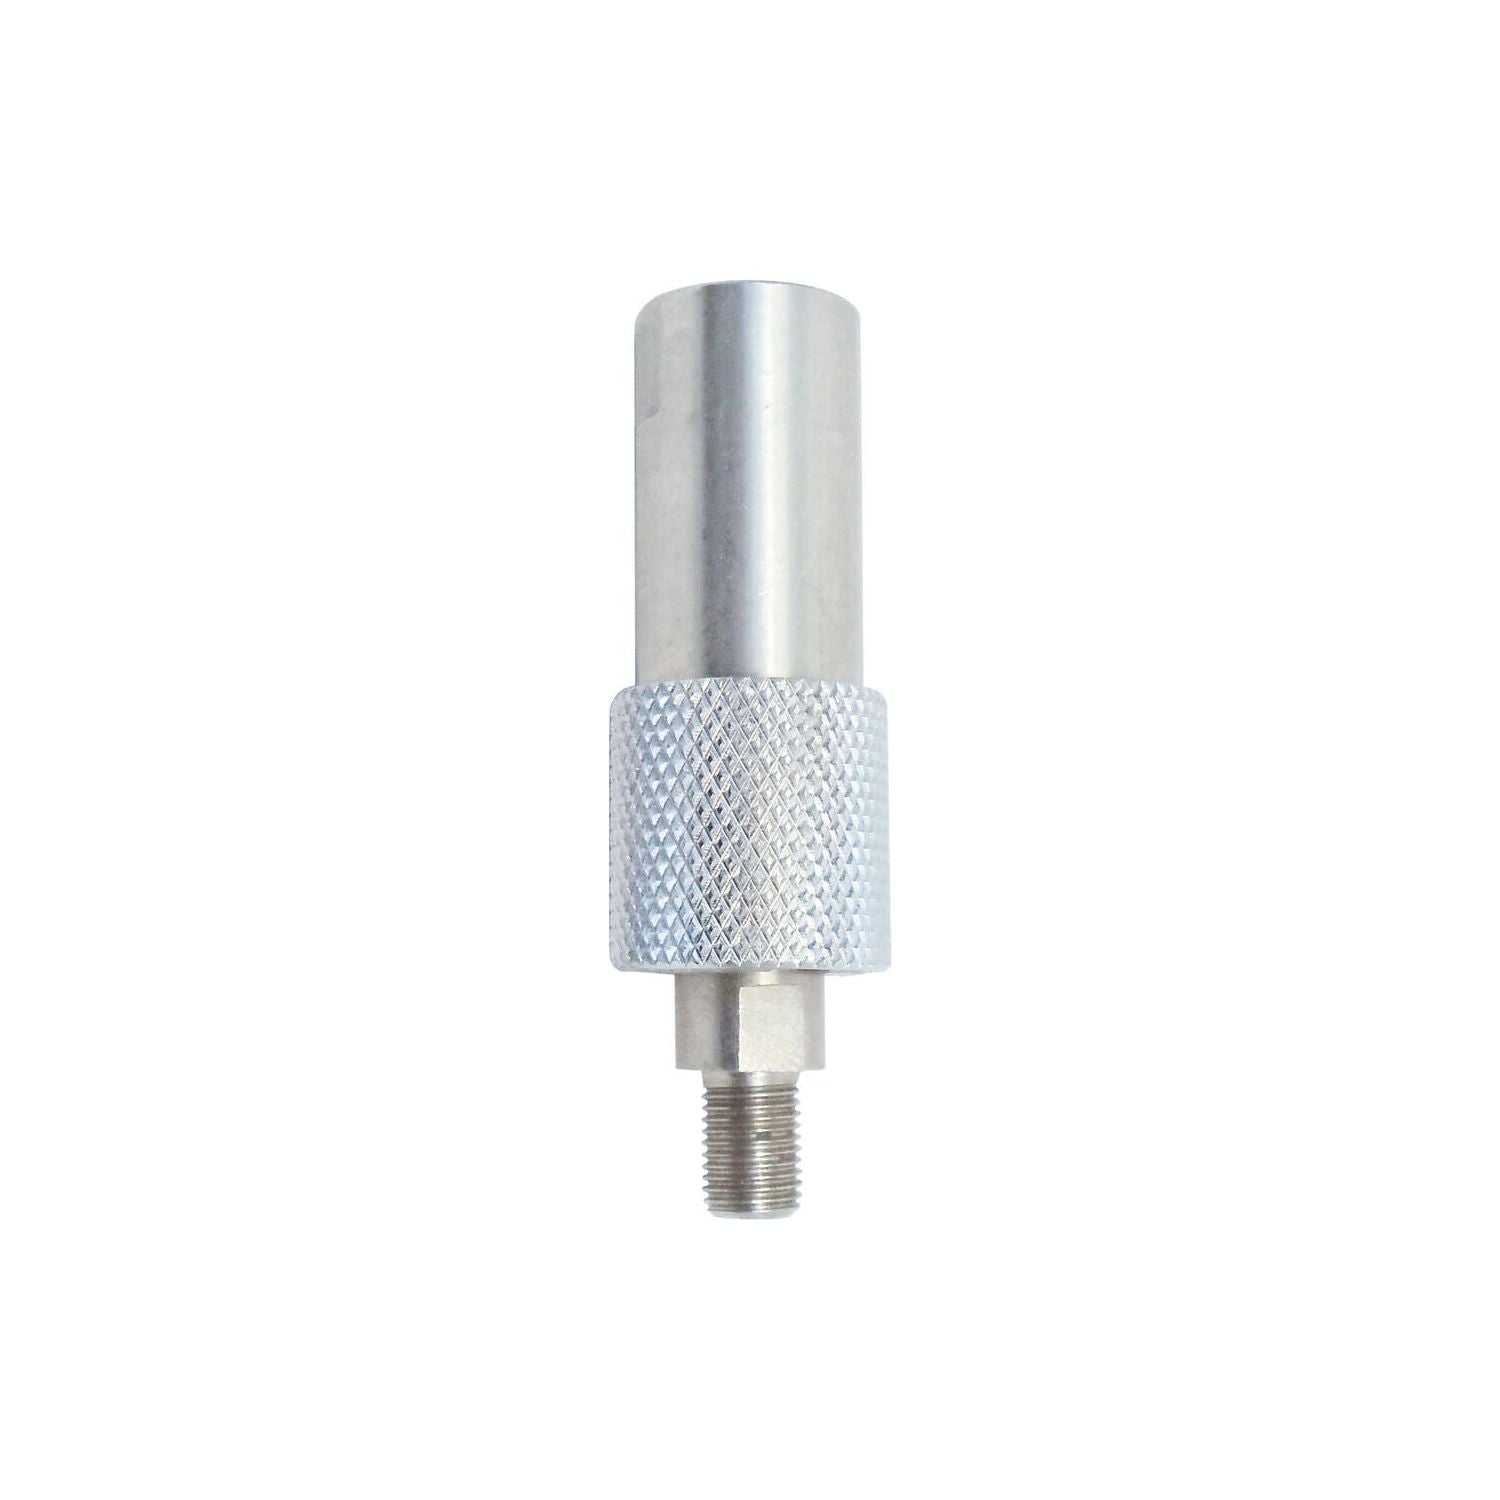 Workman HDQDS 3/8" X 24 Heavy Duty SS Antenna Quick Disconnect